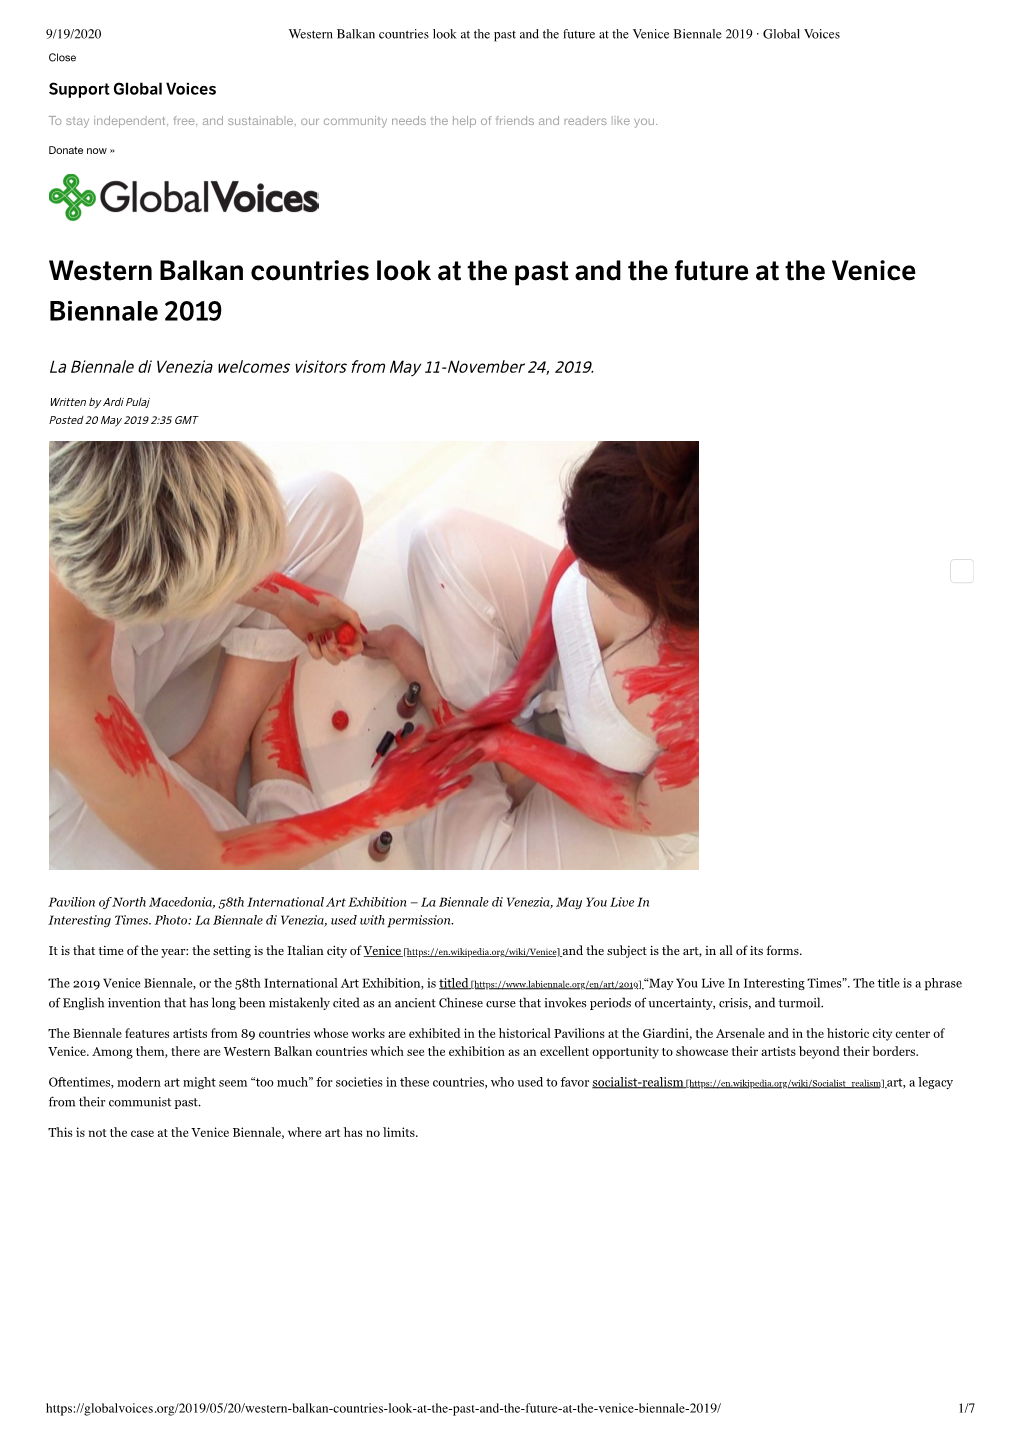 Western Balkan Countries Look at the Past and the Future at the Venice Biennale 2019 · Global Voices